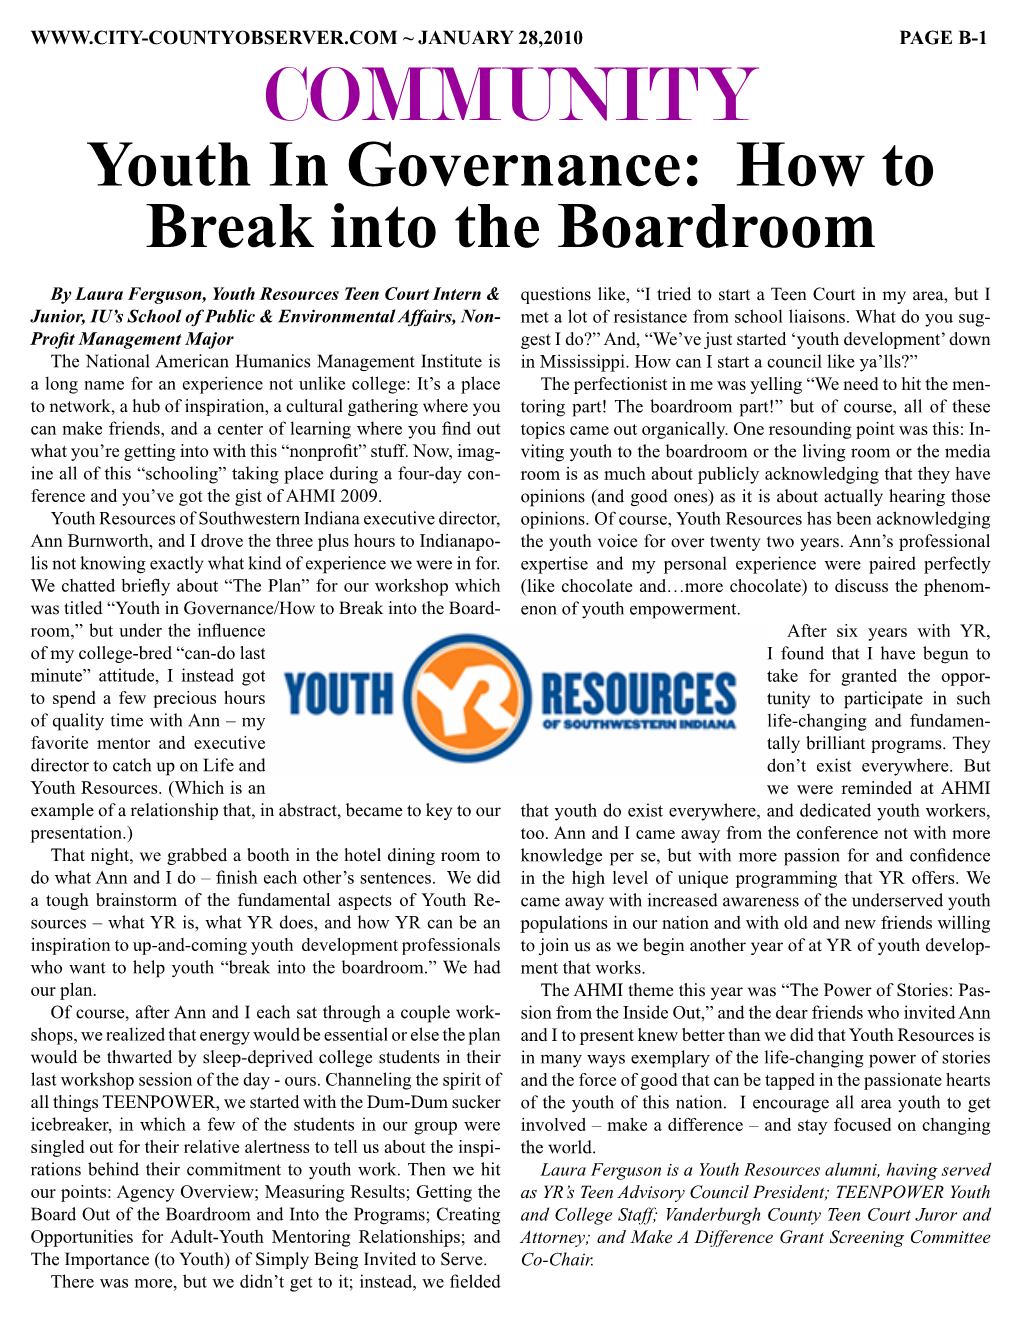 COMMUNITY Youth in Governance: How to Break Into the Boardroom